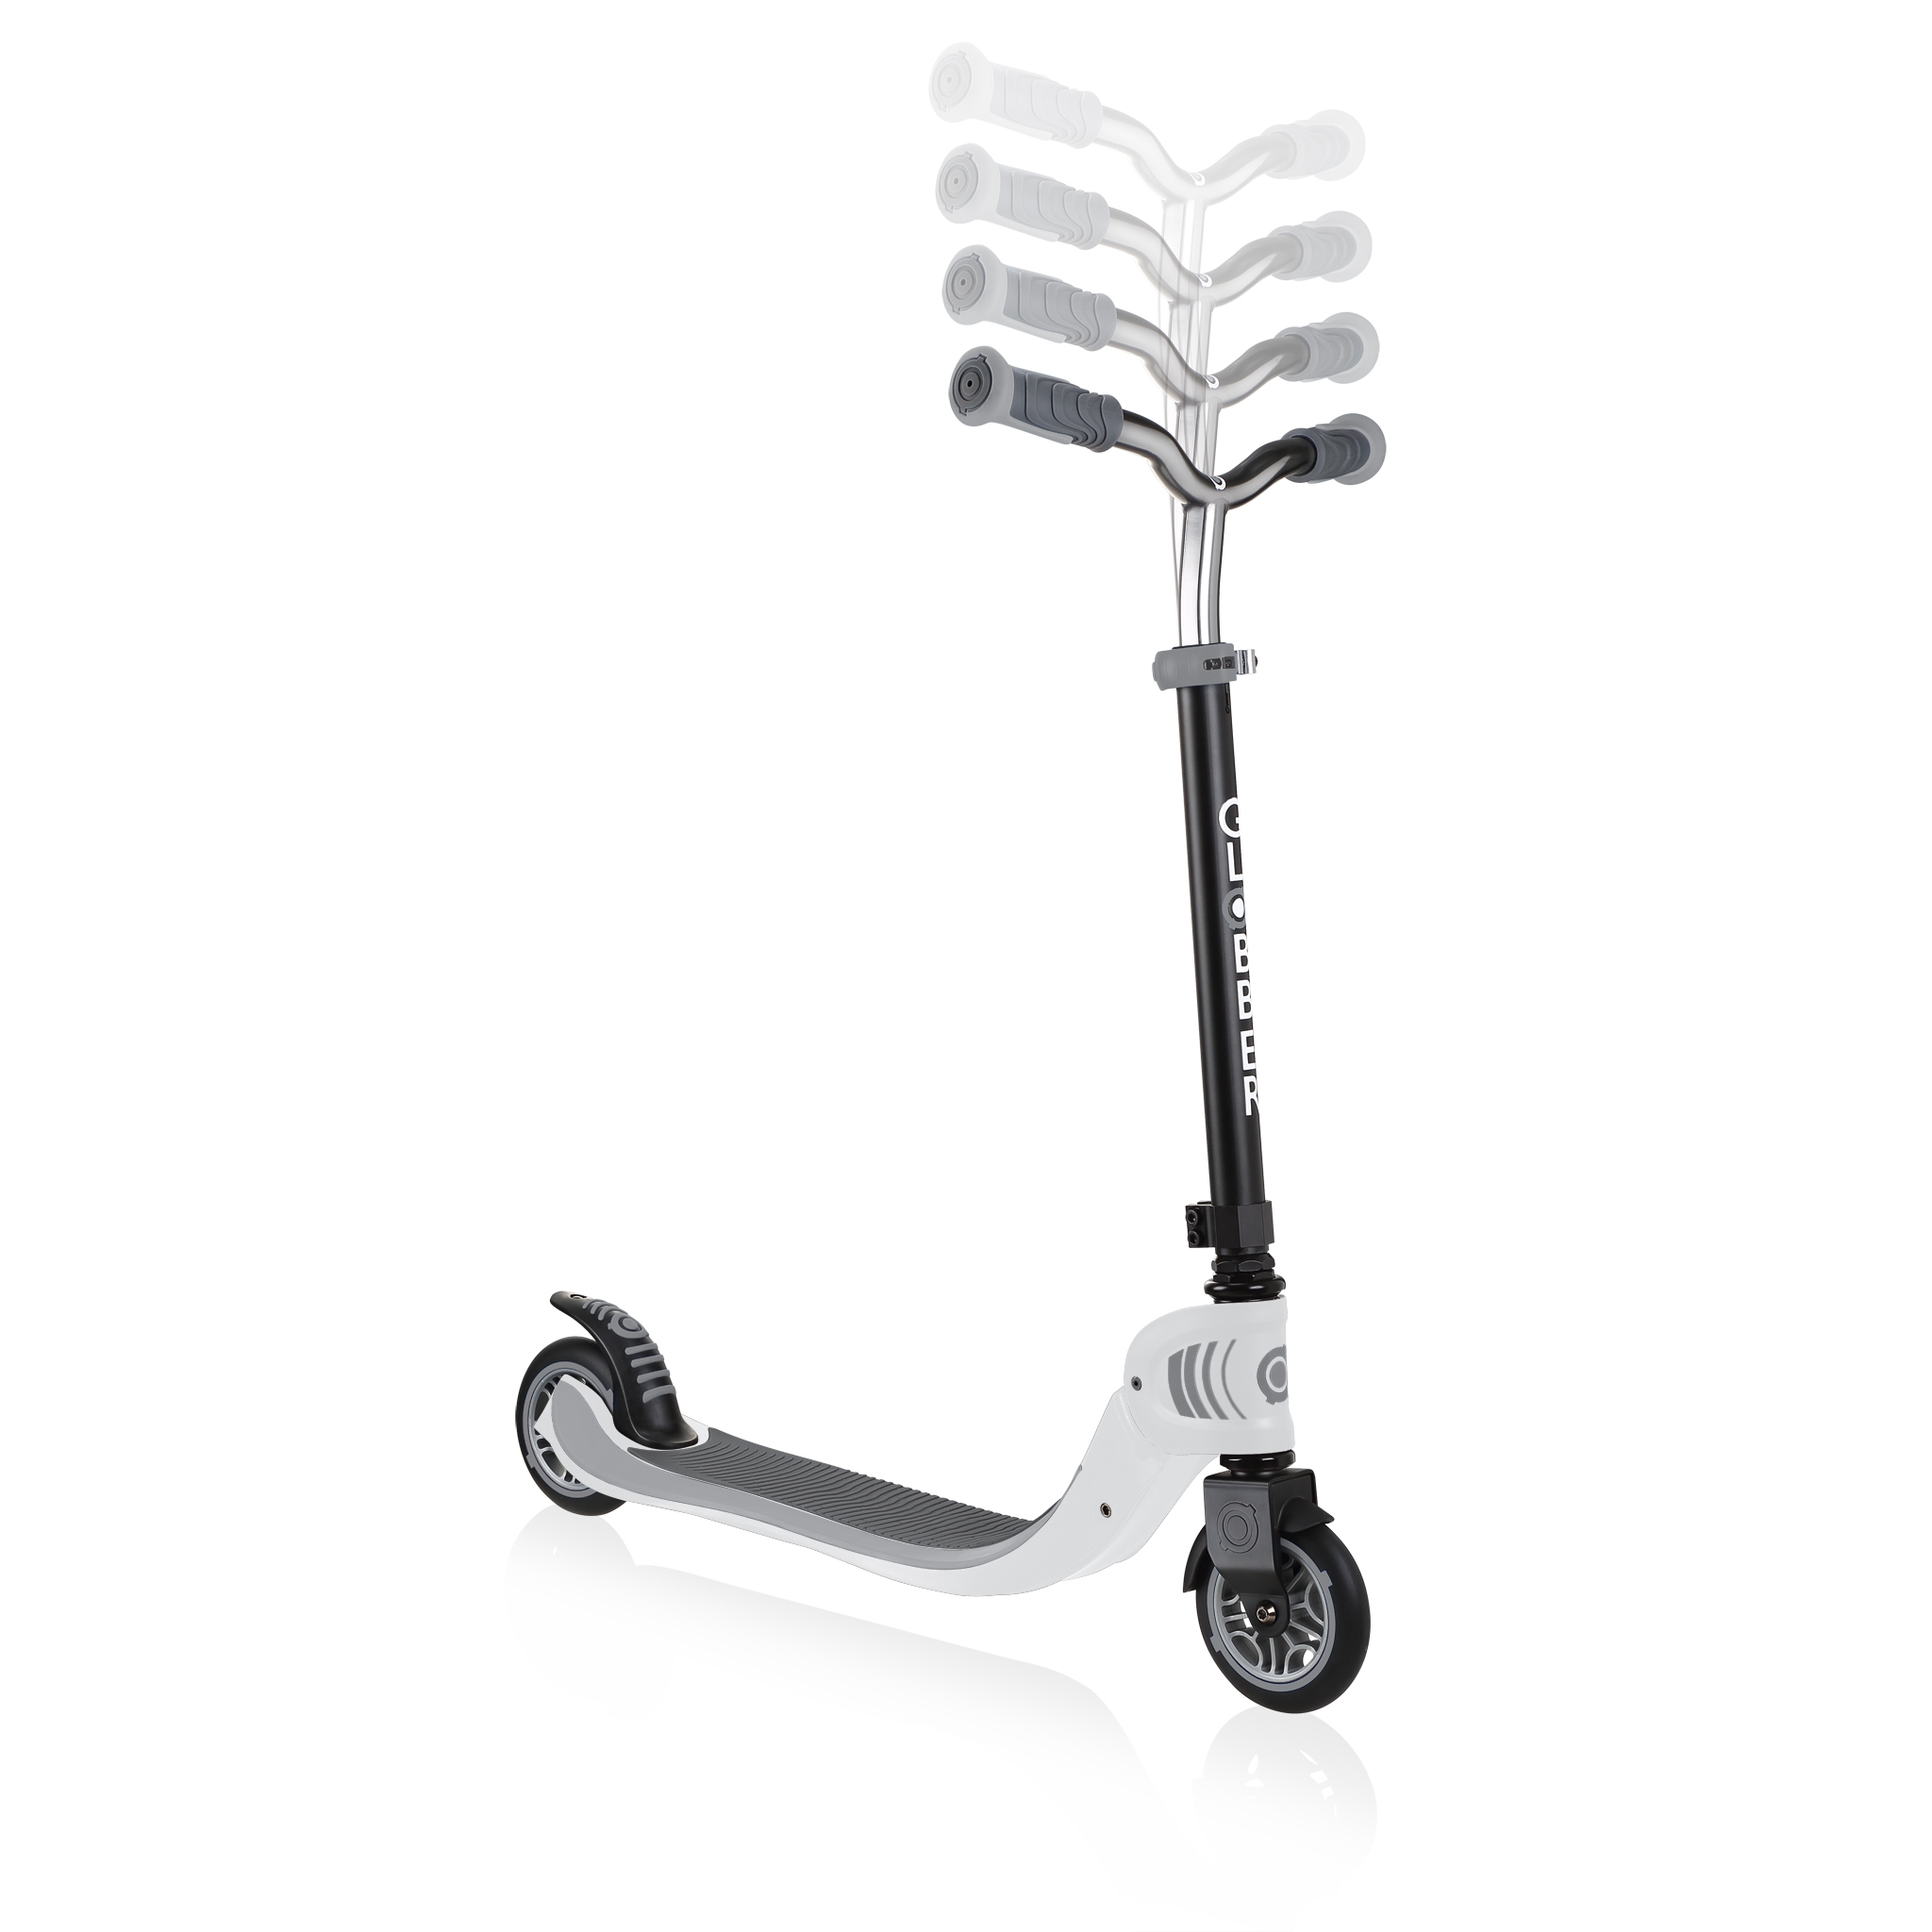 FLOW-FOLDABLE-125-2-wheel-scooter-for-kids-with-adjustable-t-bar-white 2